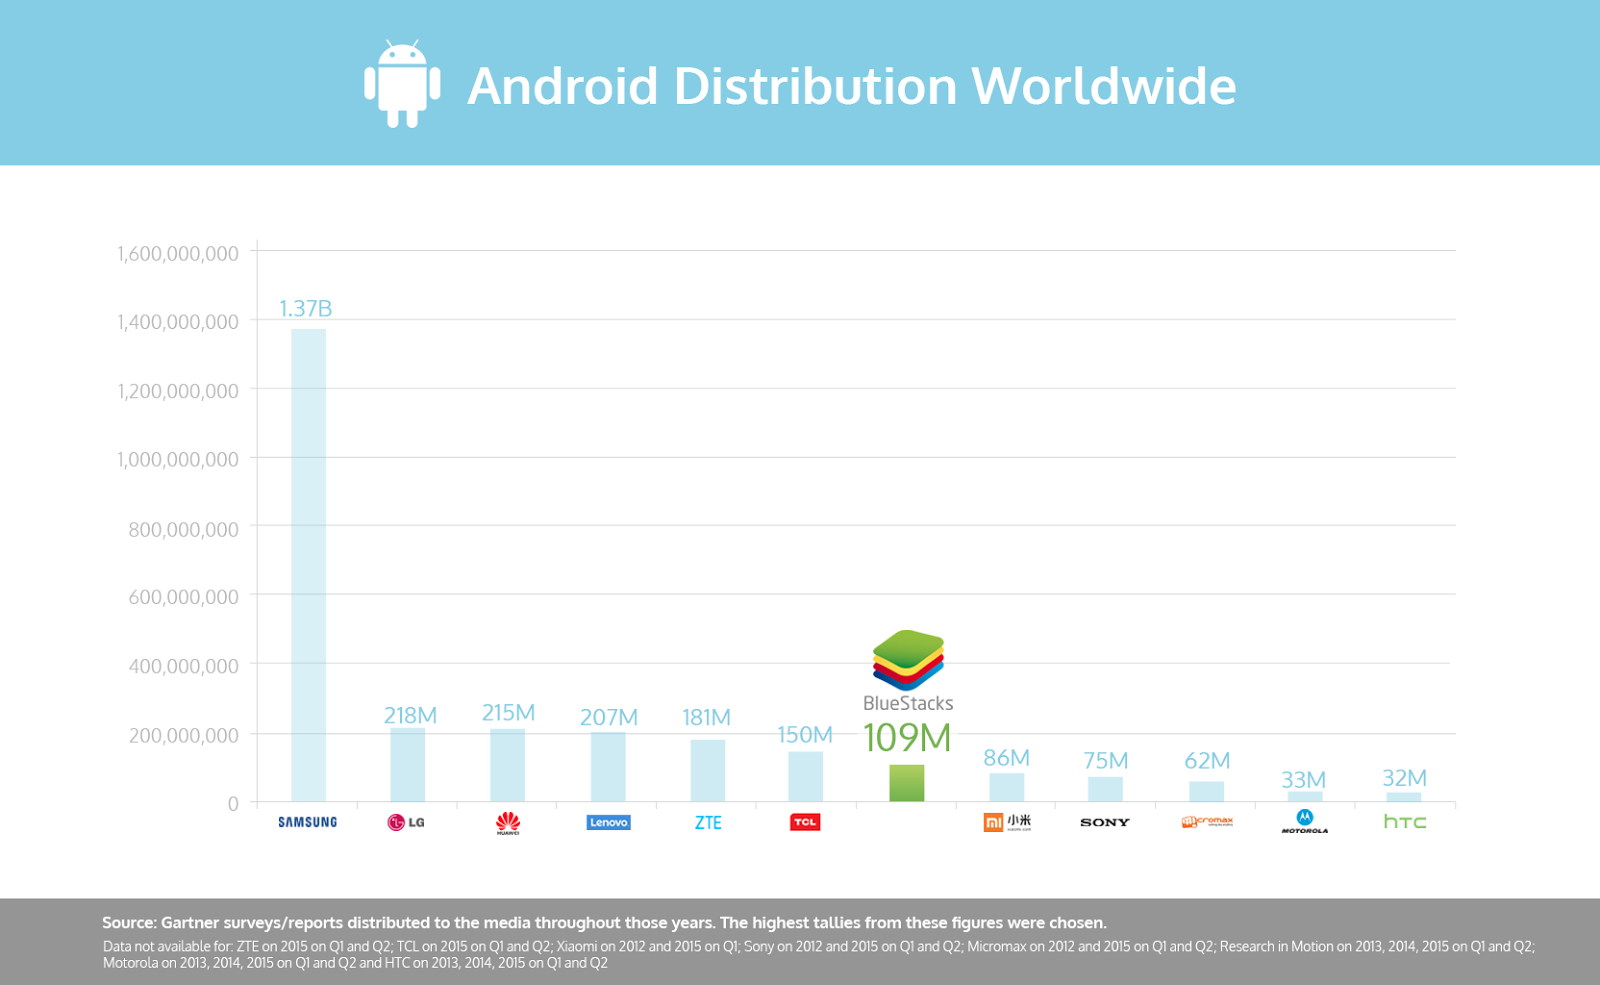 Top Android Footprint Worldwide